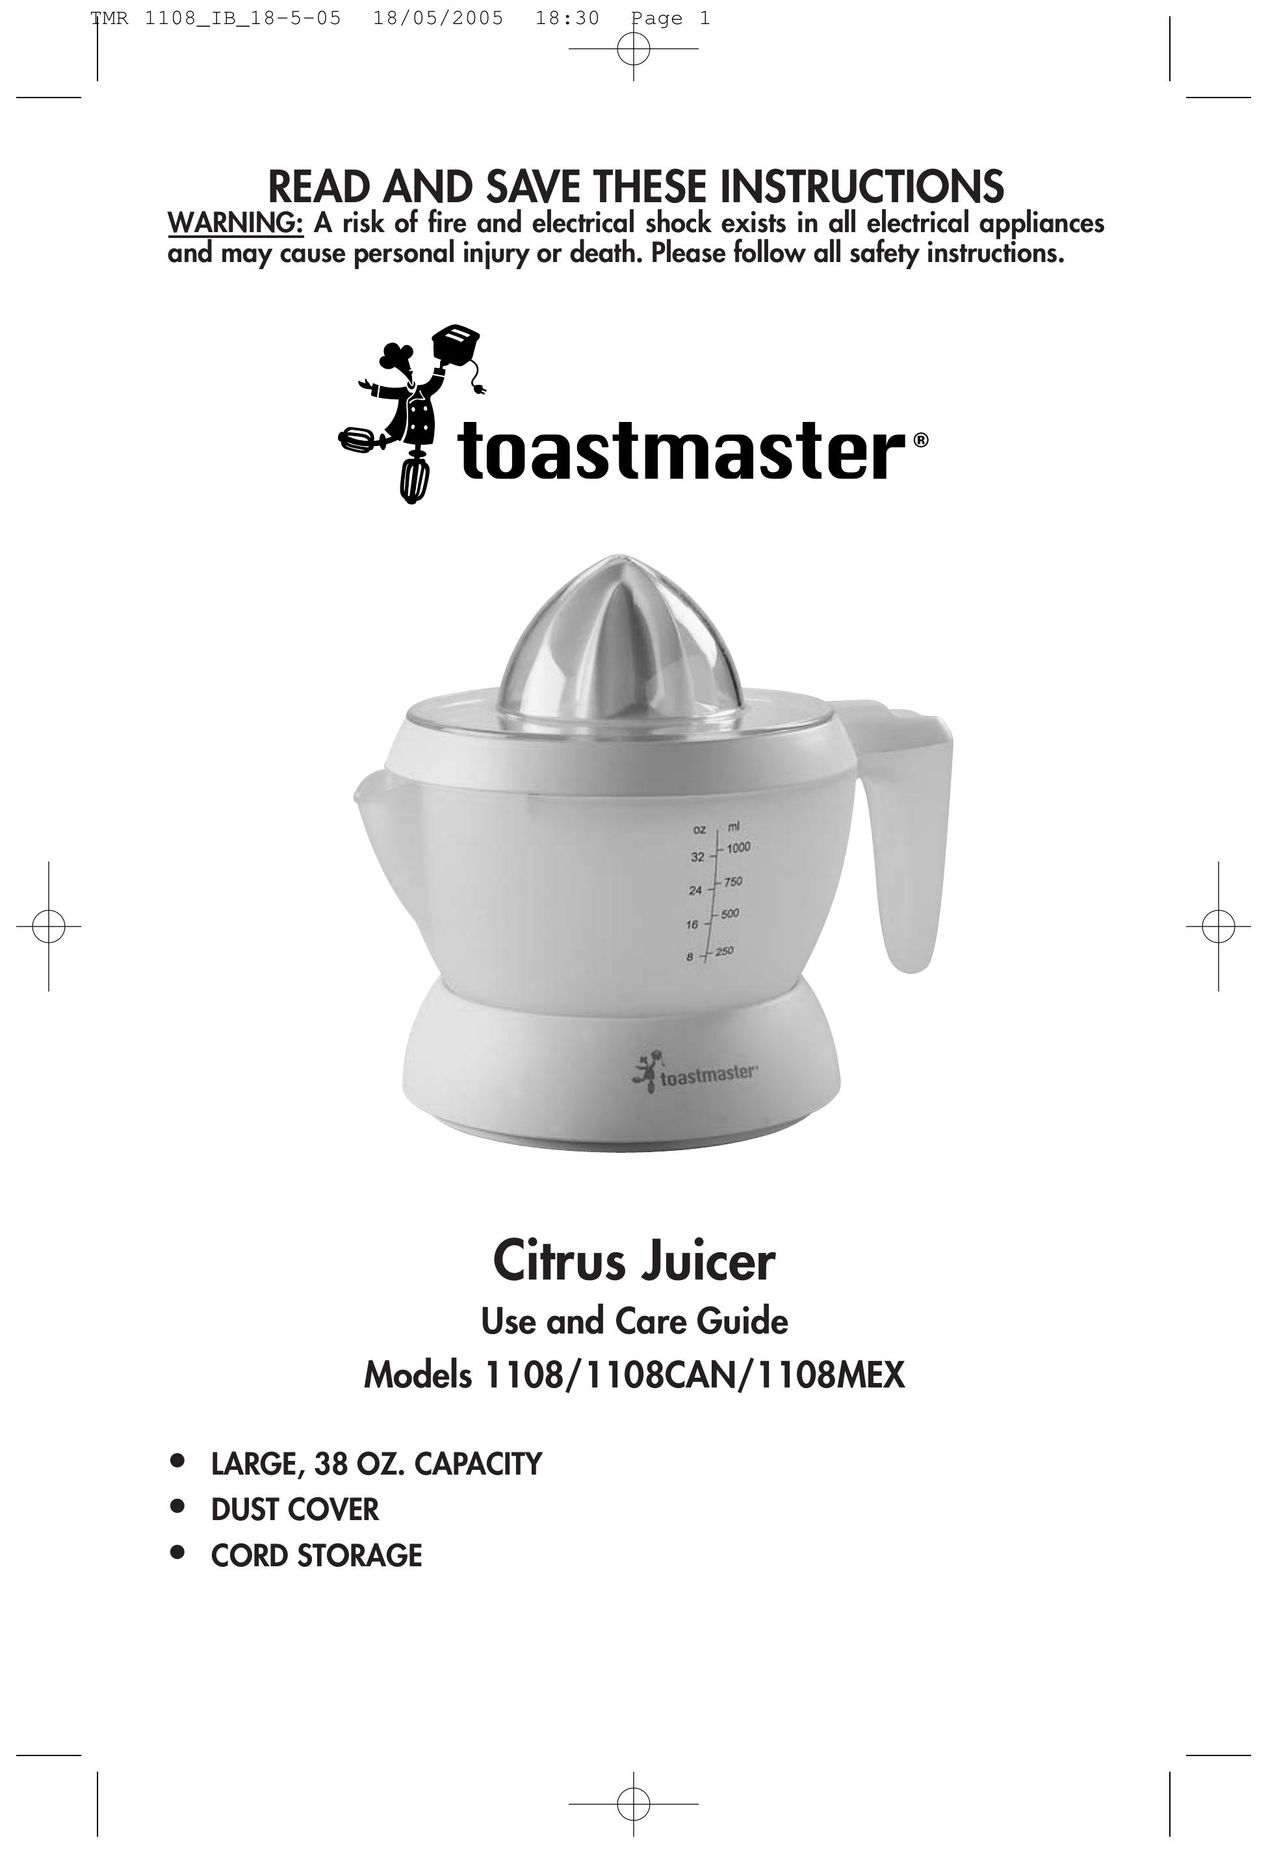 Toastmaster 1108CAN Juicer User Manual